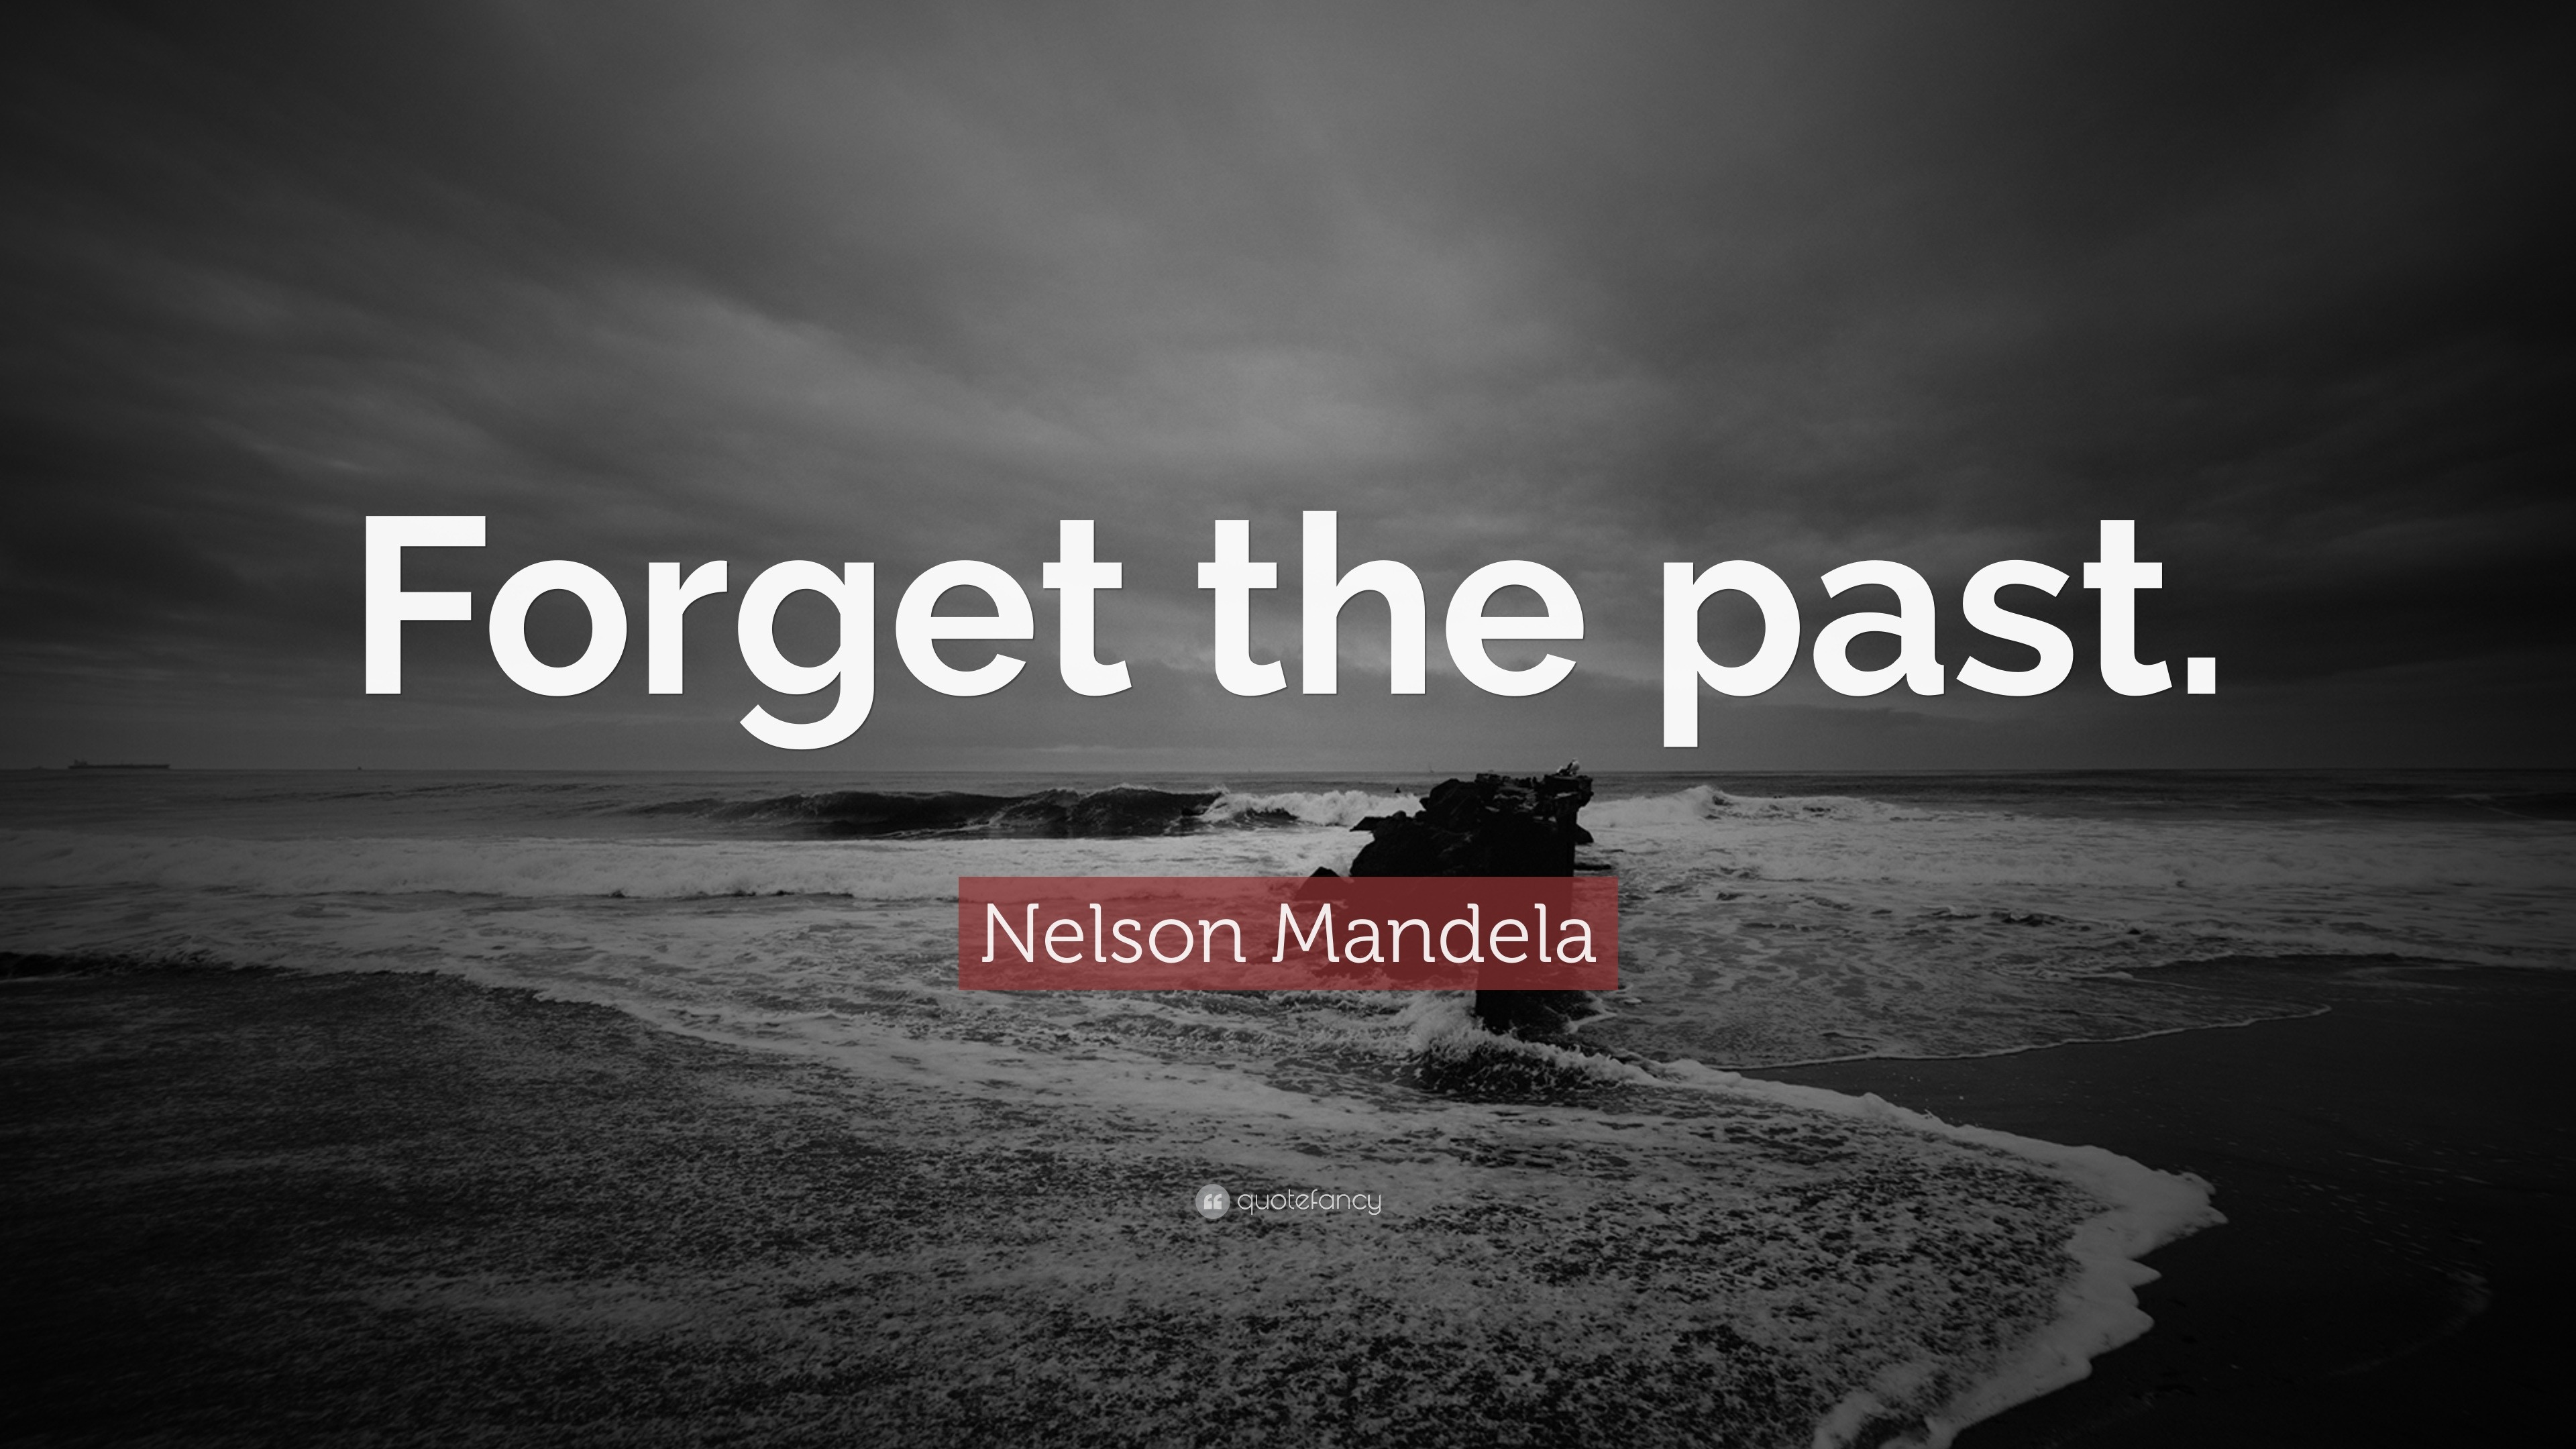 48 Cool and Inspiring Forget the past quotes and captions